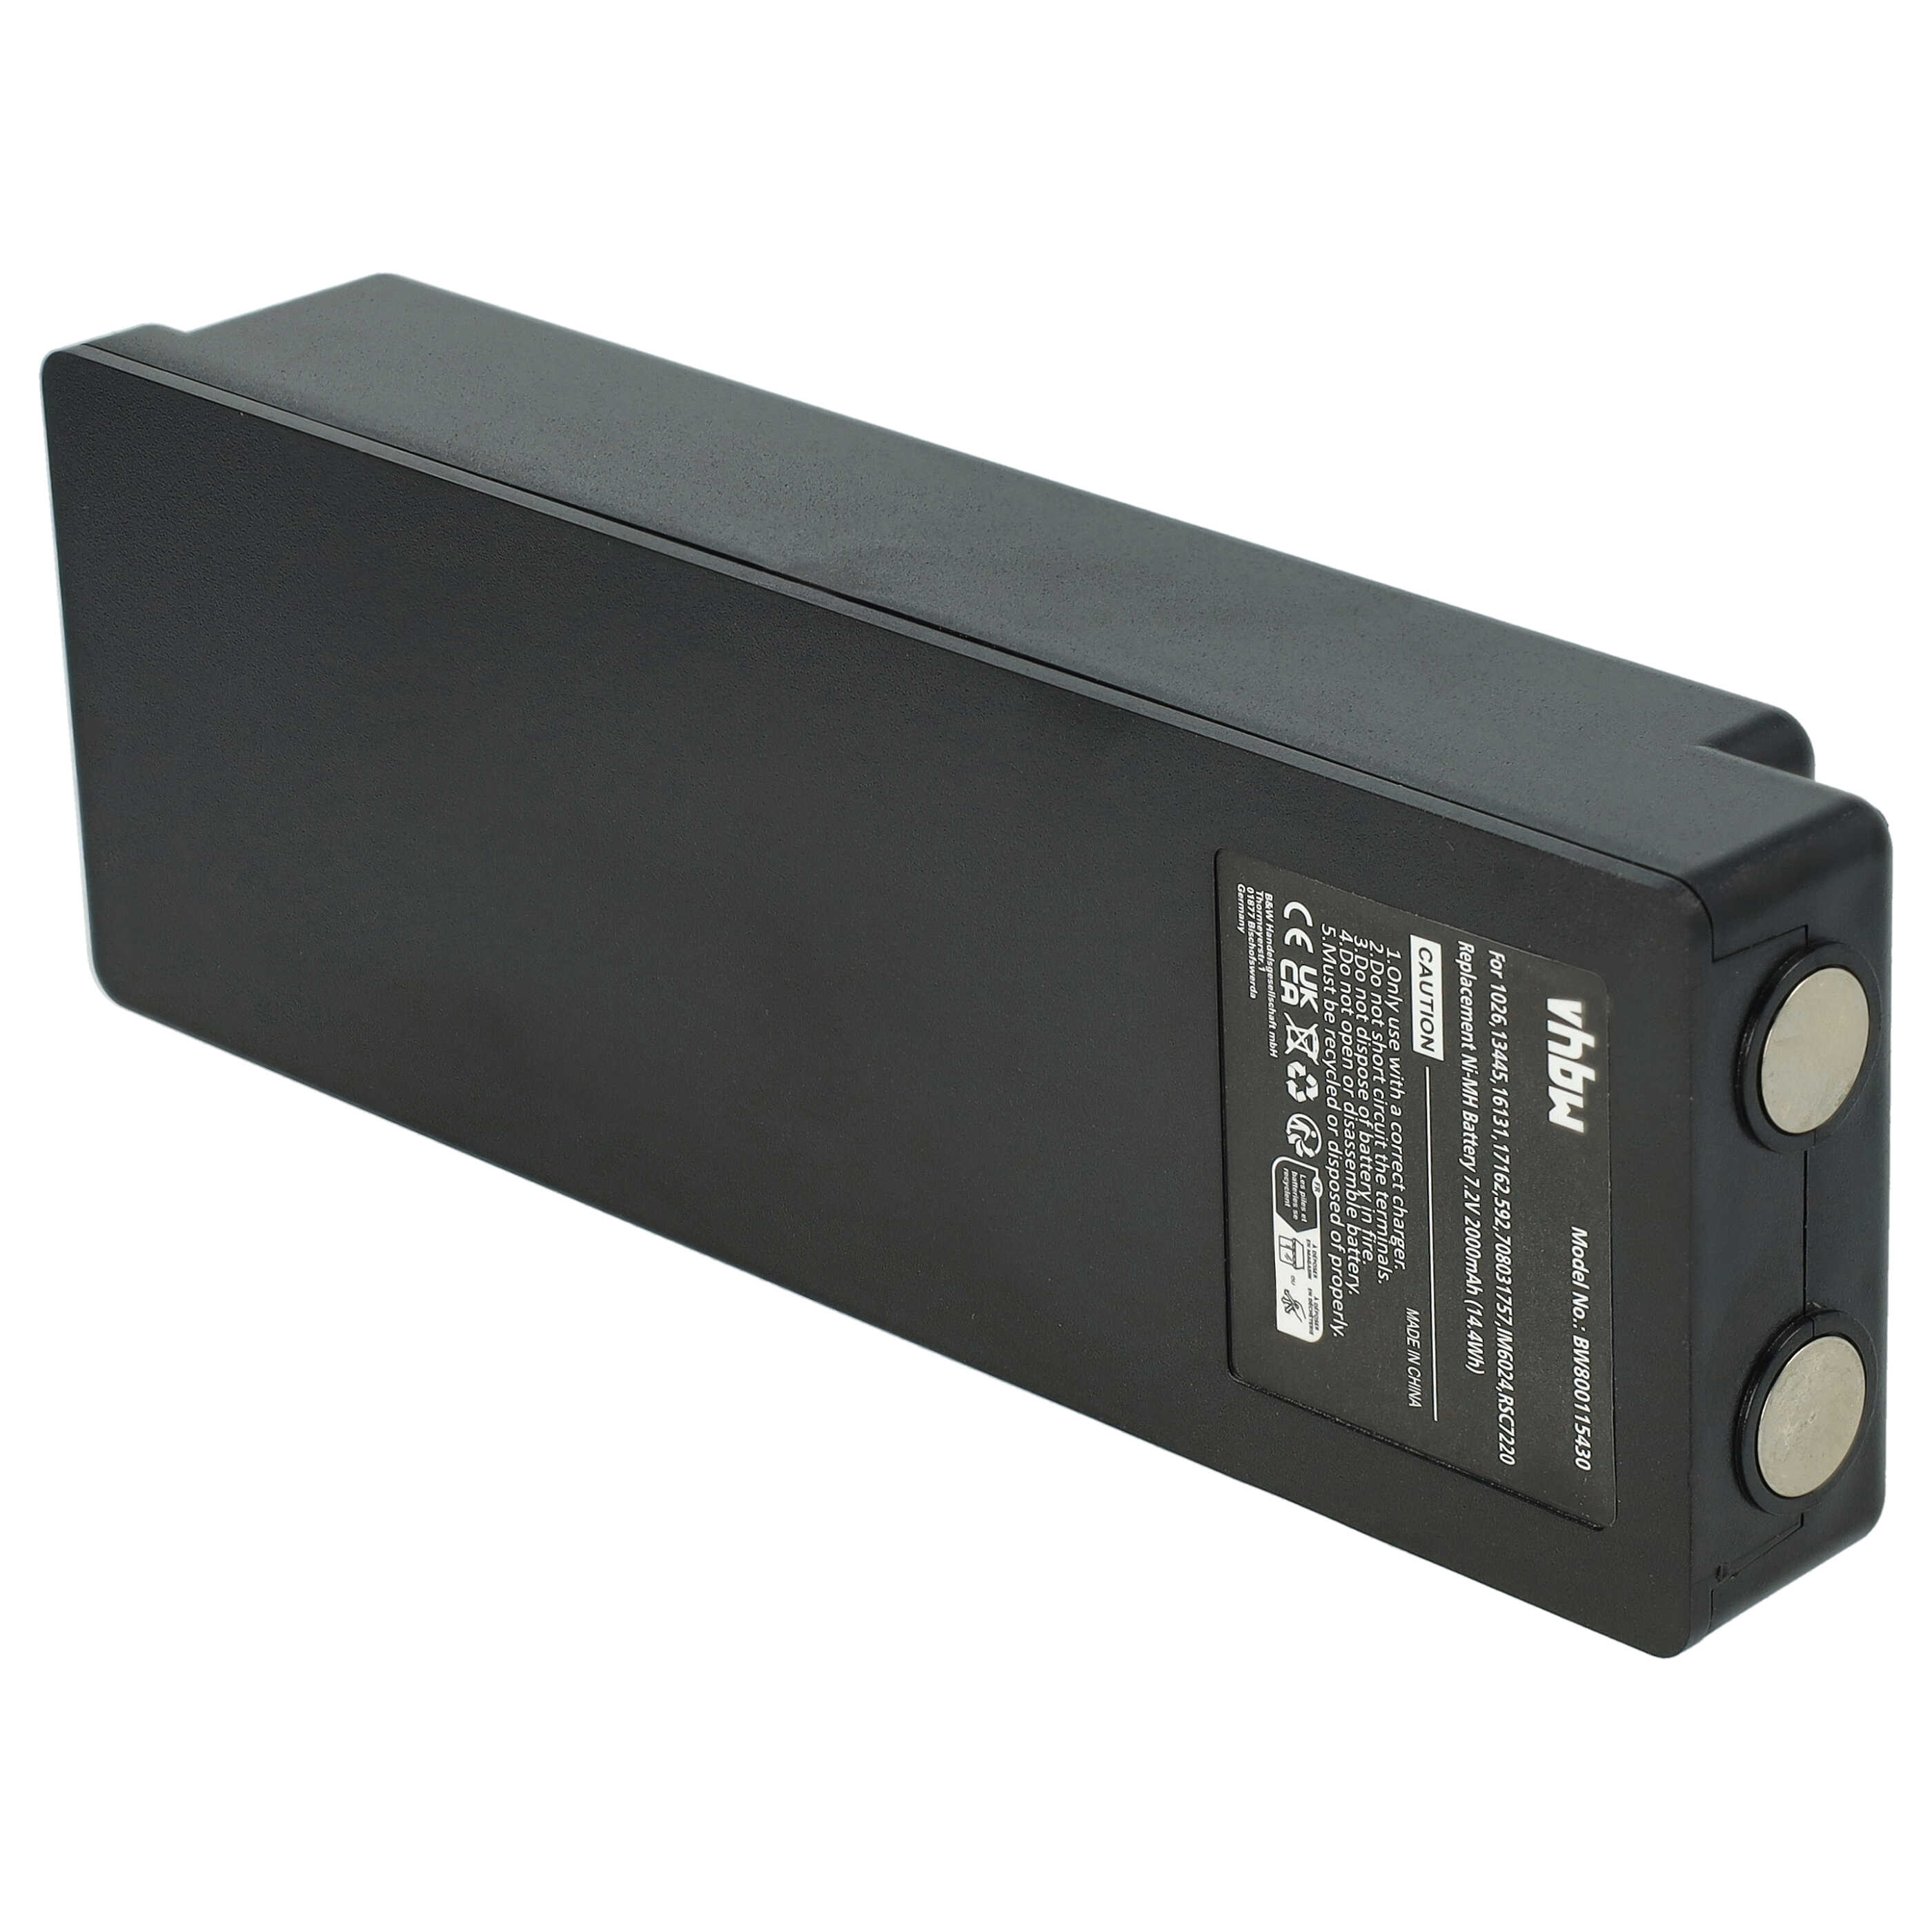 Industrial Remote Control Replacement Battery for Palfinger / Scanreco 590, 592, RC400 - 2000mAh 7.2V NiMH